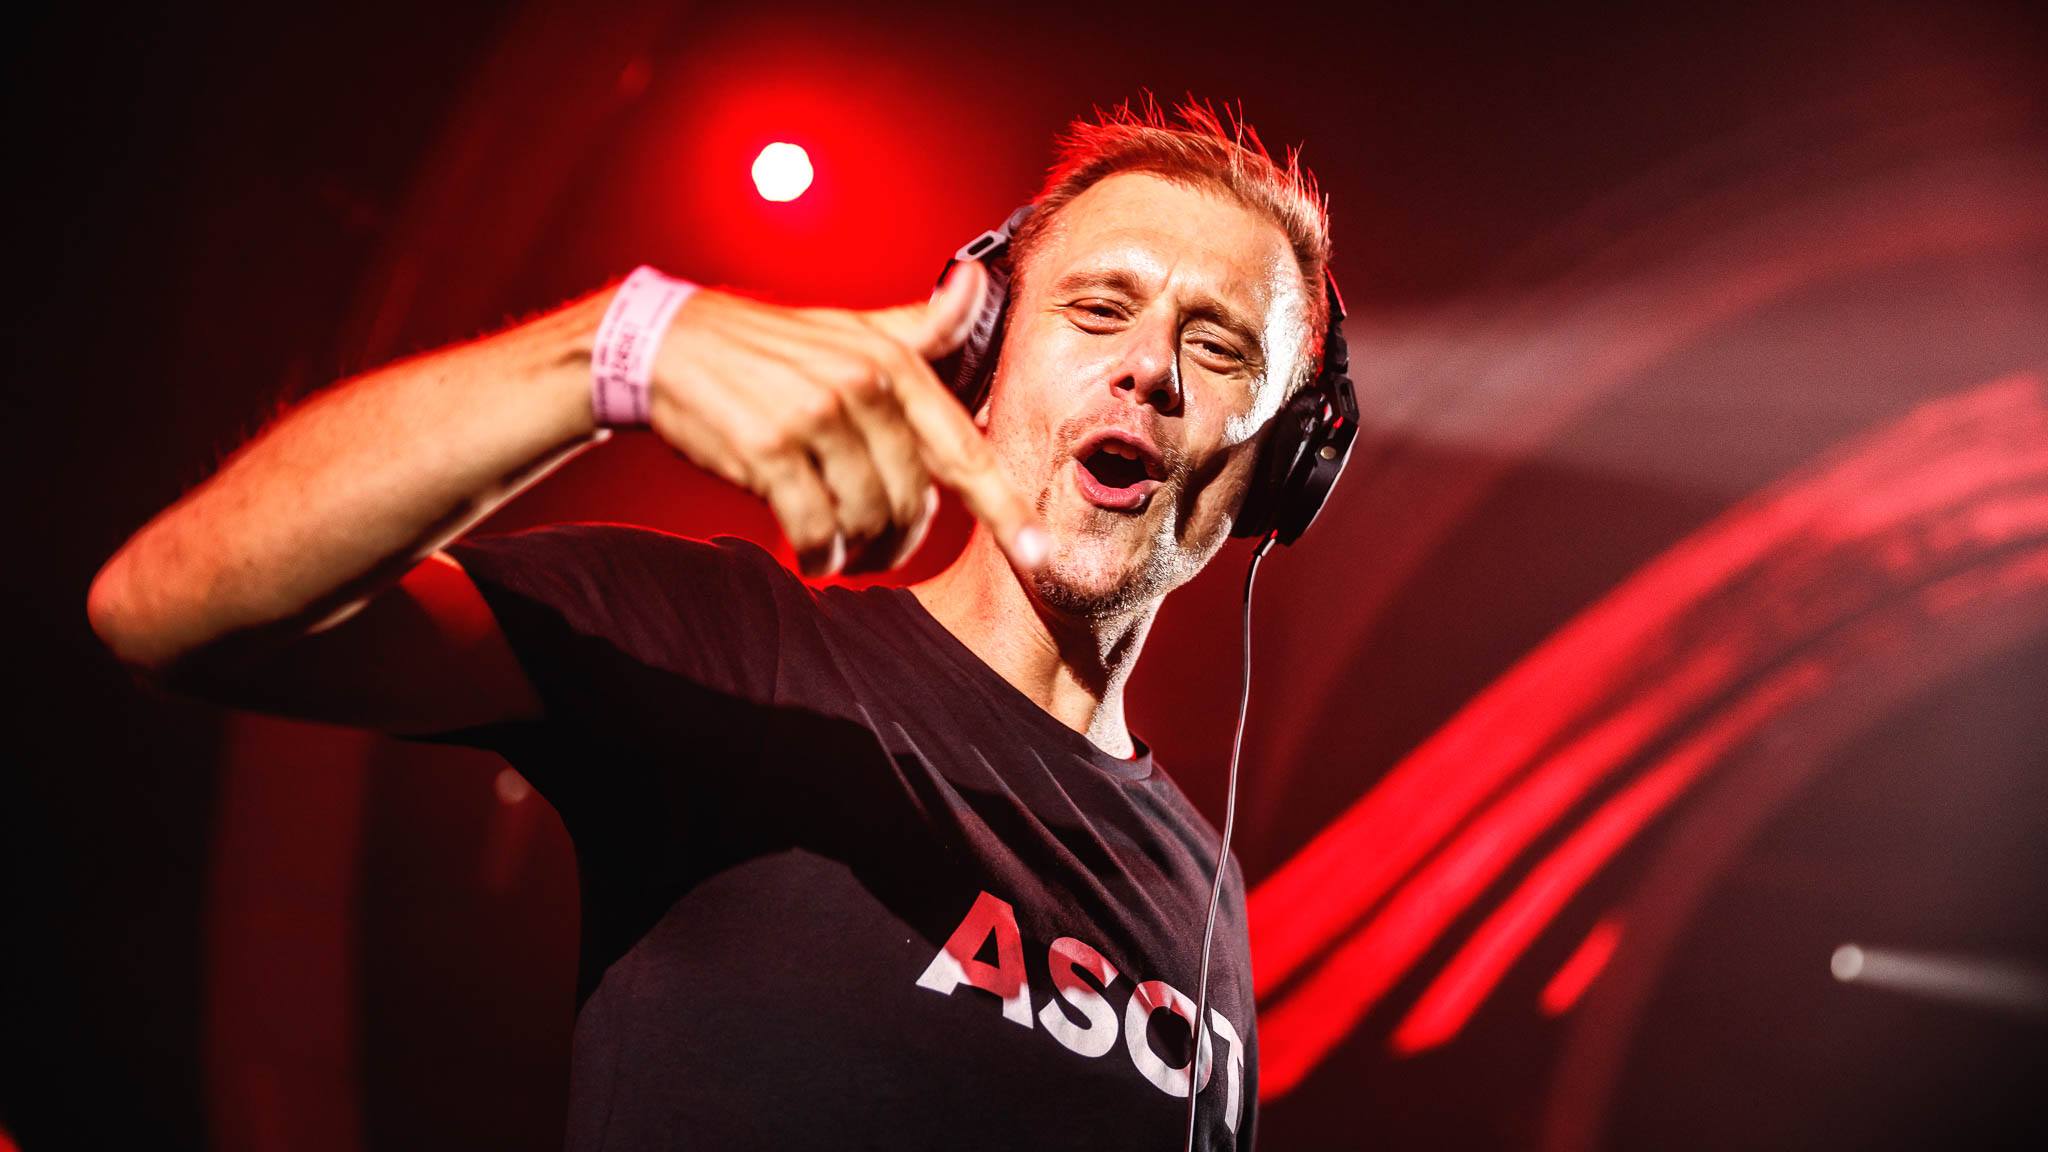 Armin van Buuren Reveals the All-Time A State of Trance Top 1000 List.